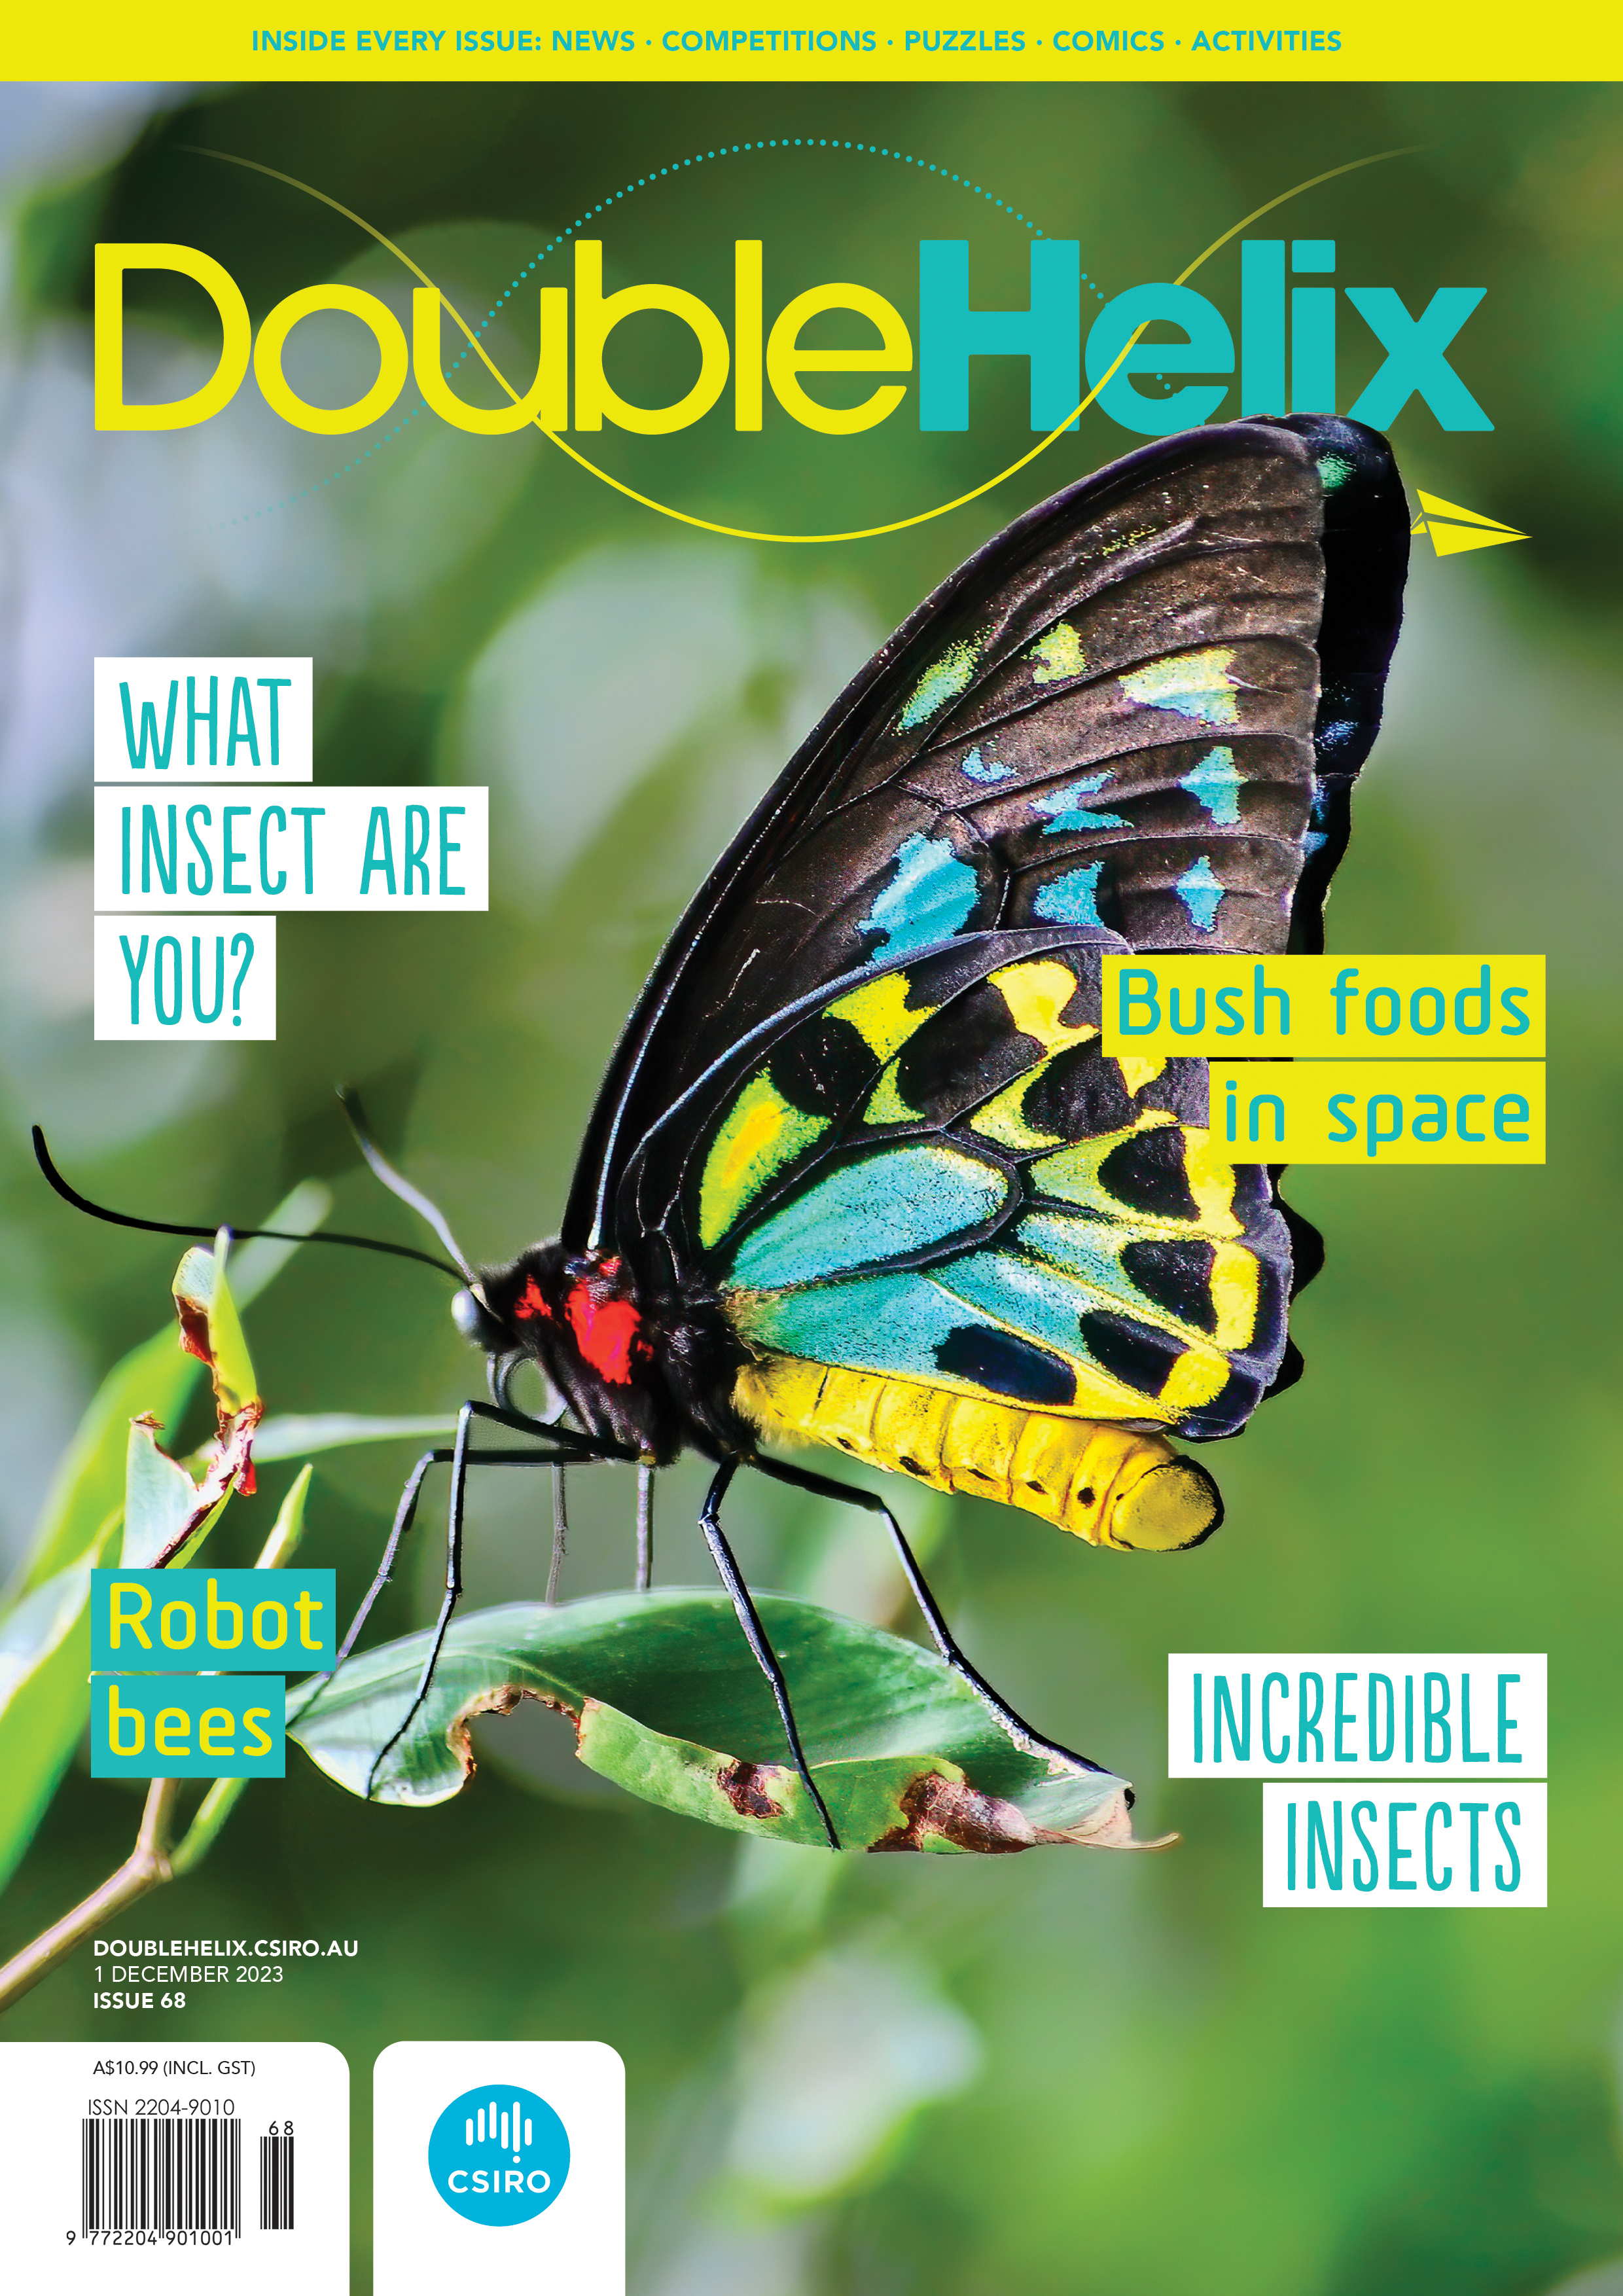 DH68 cover featuring a butterfly